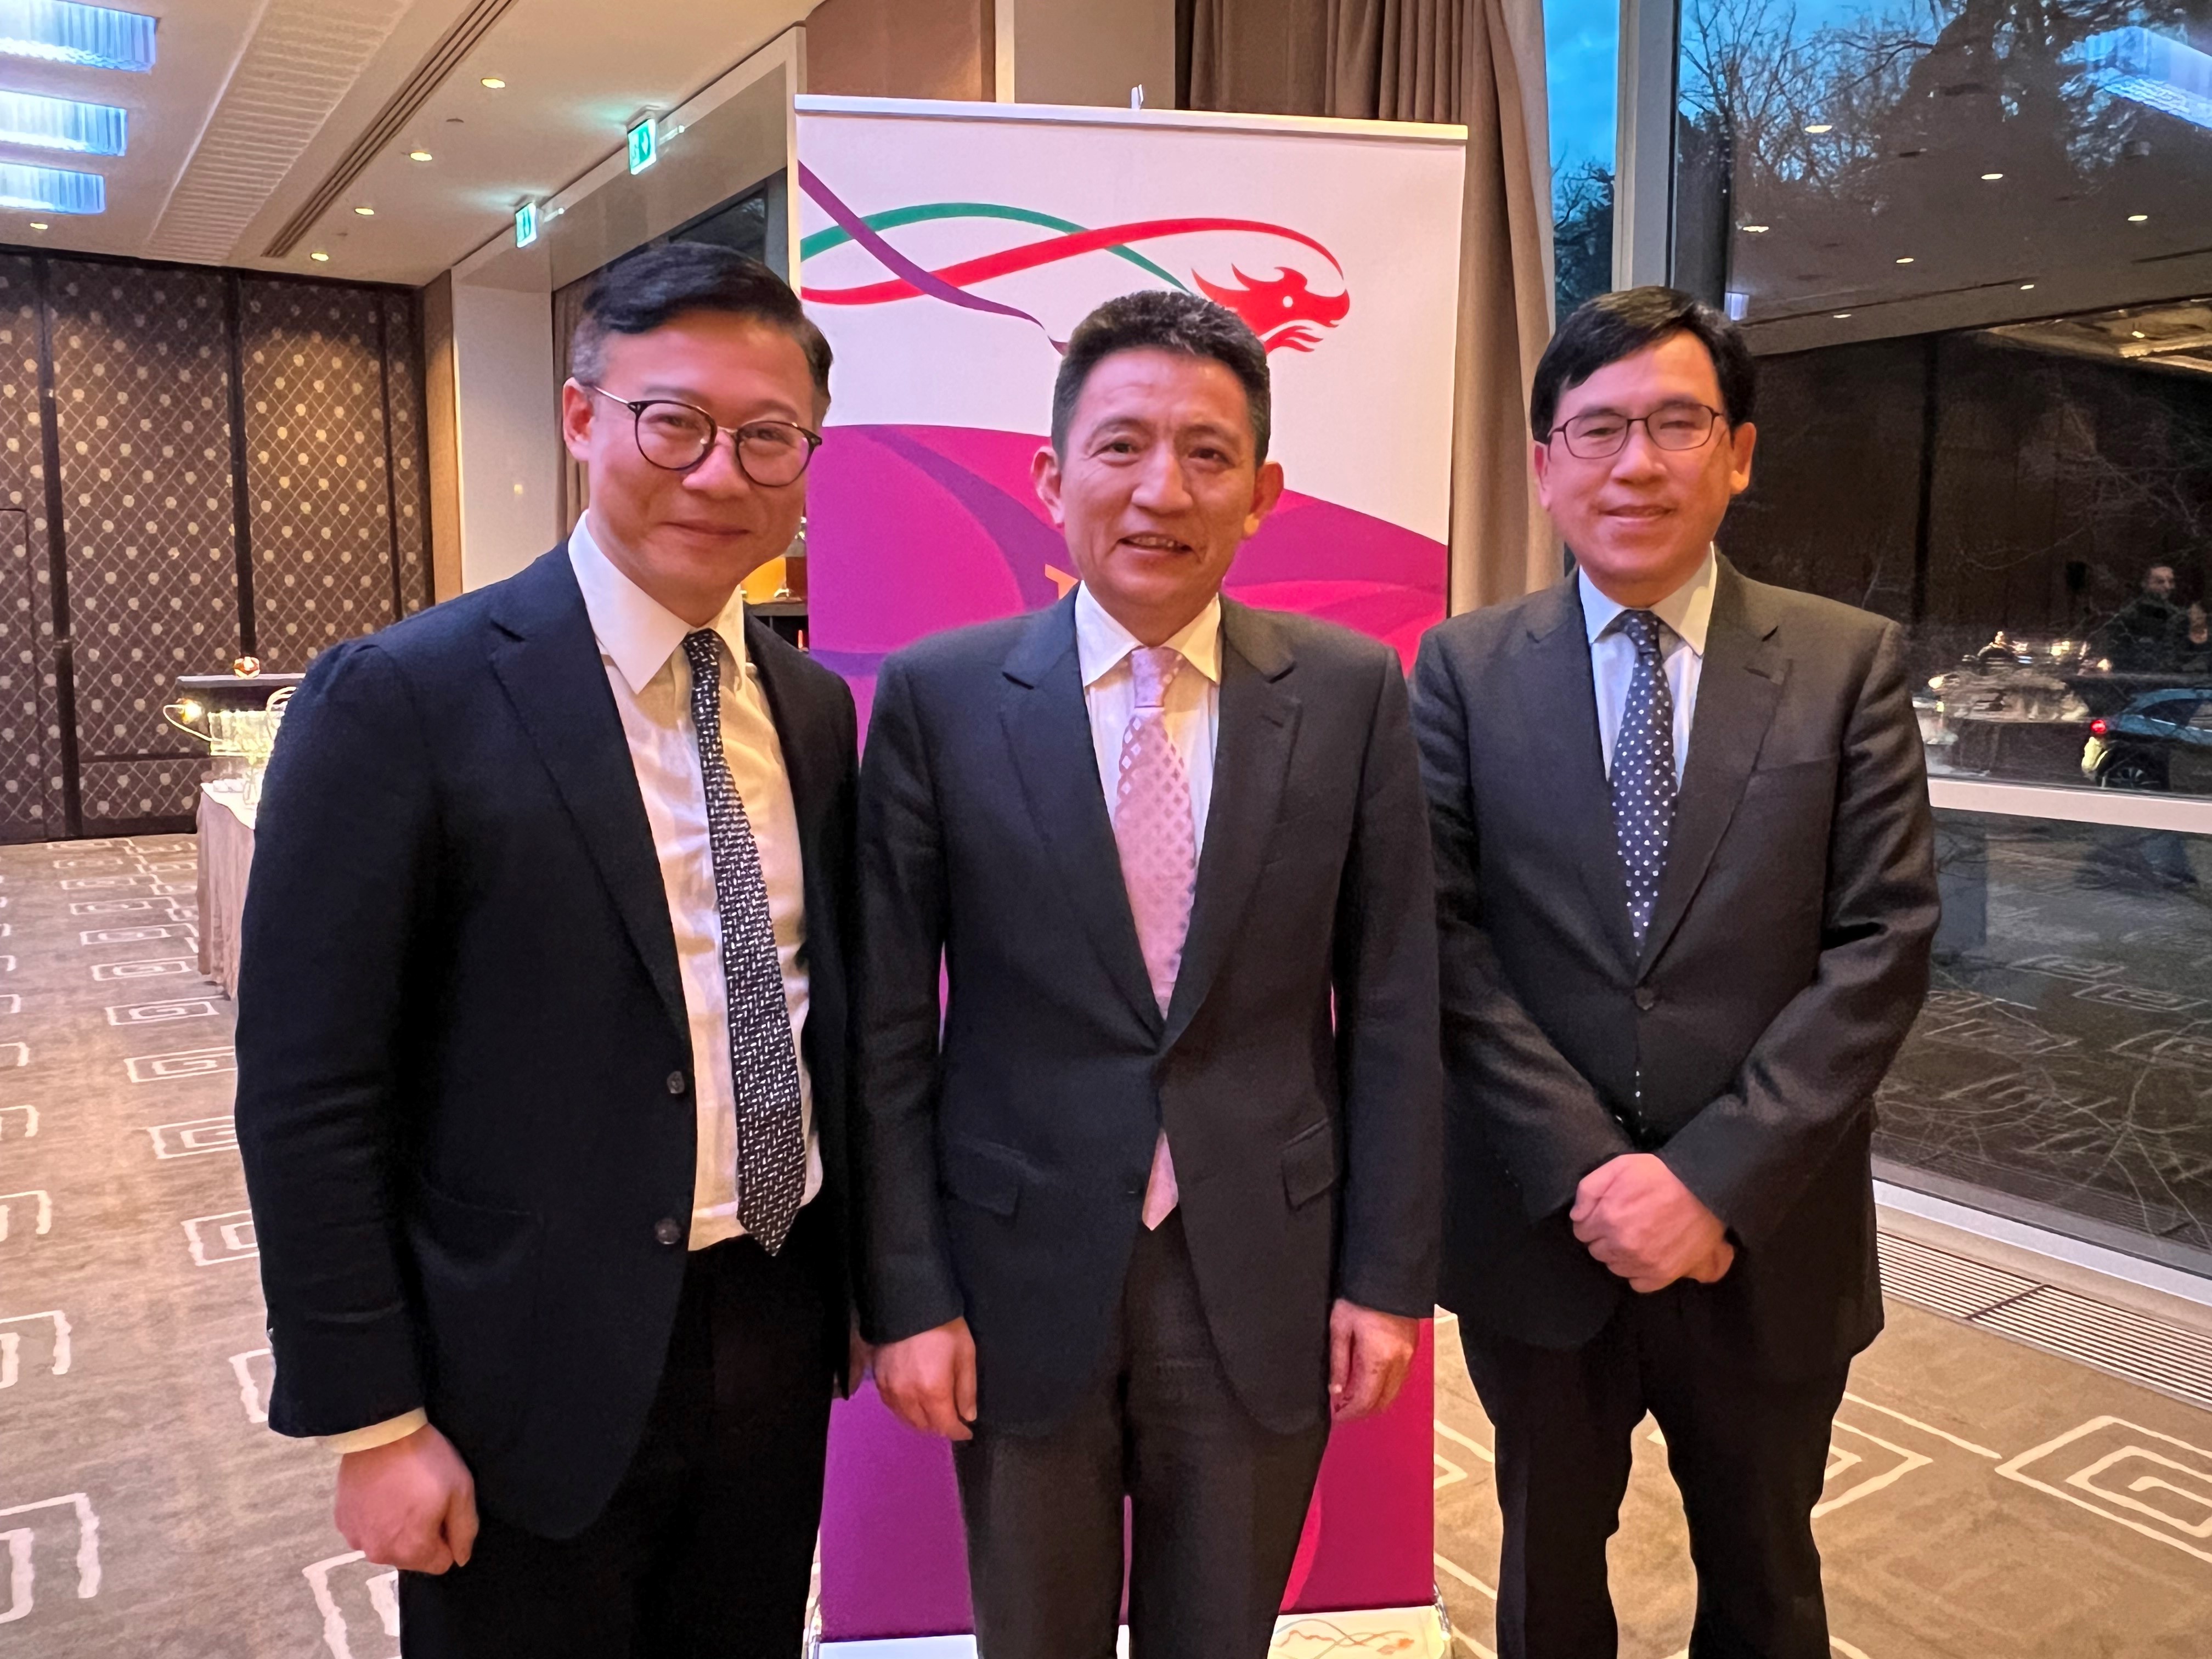 The Deputy Secretary for Justice, Mr Cheung Kwok-kwan, on March 8 (Geneva time) attended in Geneva, Switzerland, a reception hosted by the Hong Kong Economic and Trade Office in Geneva. Photo shows (from left) Mr Cheung; the Ambassador Extraordinary and Plenipotentiary and Permanent Representative of the People's Republic of China to the World Trade Organization, Mr Li Chenggang; and the Permanent Representative of the Hong Kong Special Administrative Region of China to the World Trade Organization, Mr Laurie Lo, at the reception.